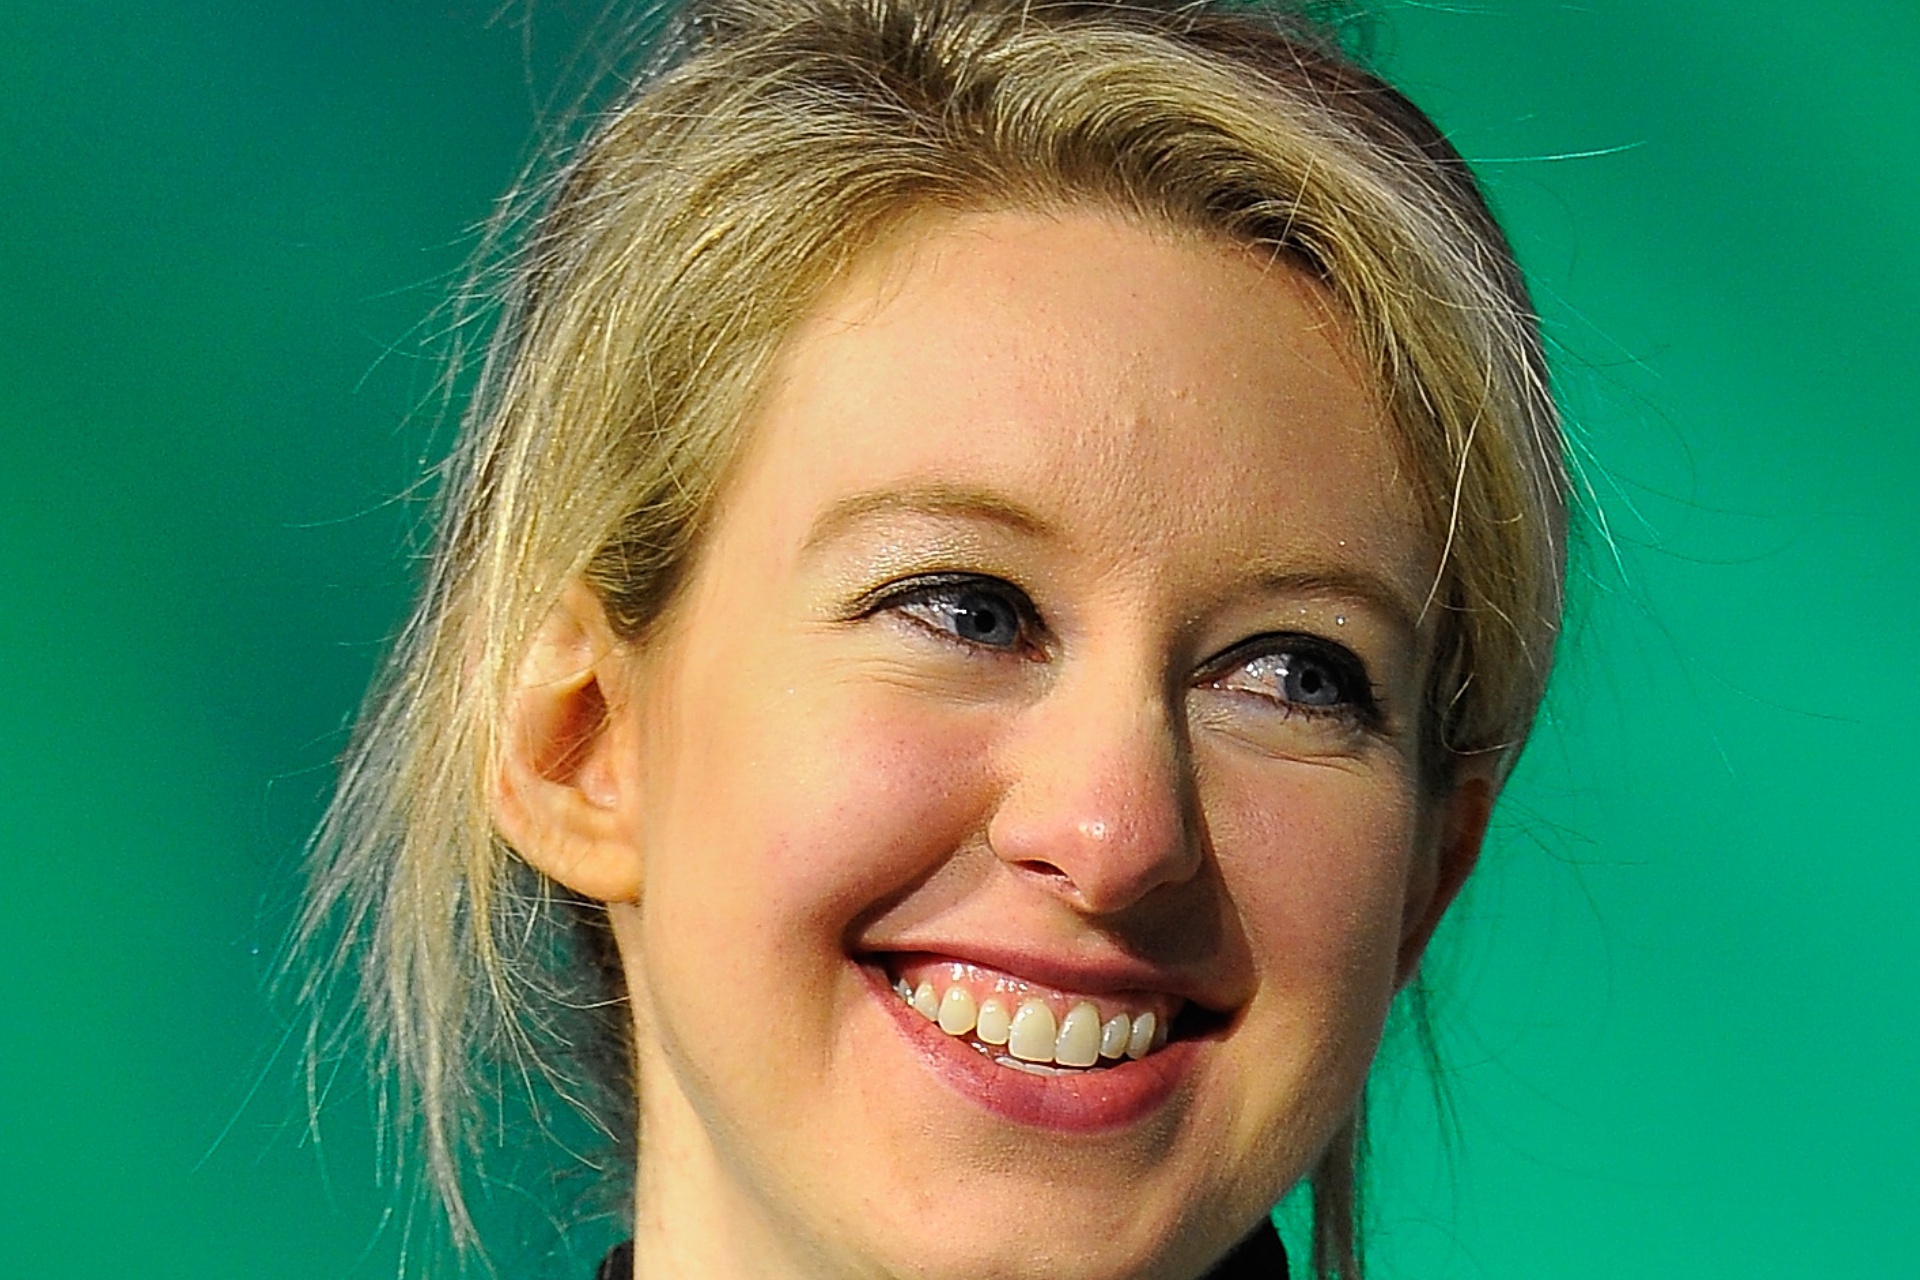 Theranos Founder Elizabeth Holmes Granted Last-Minute Reprieve to Remain Free on Bond while Court Reviews Case